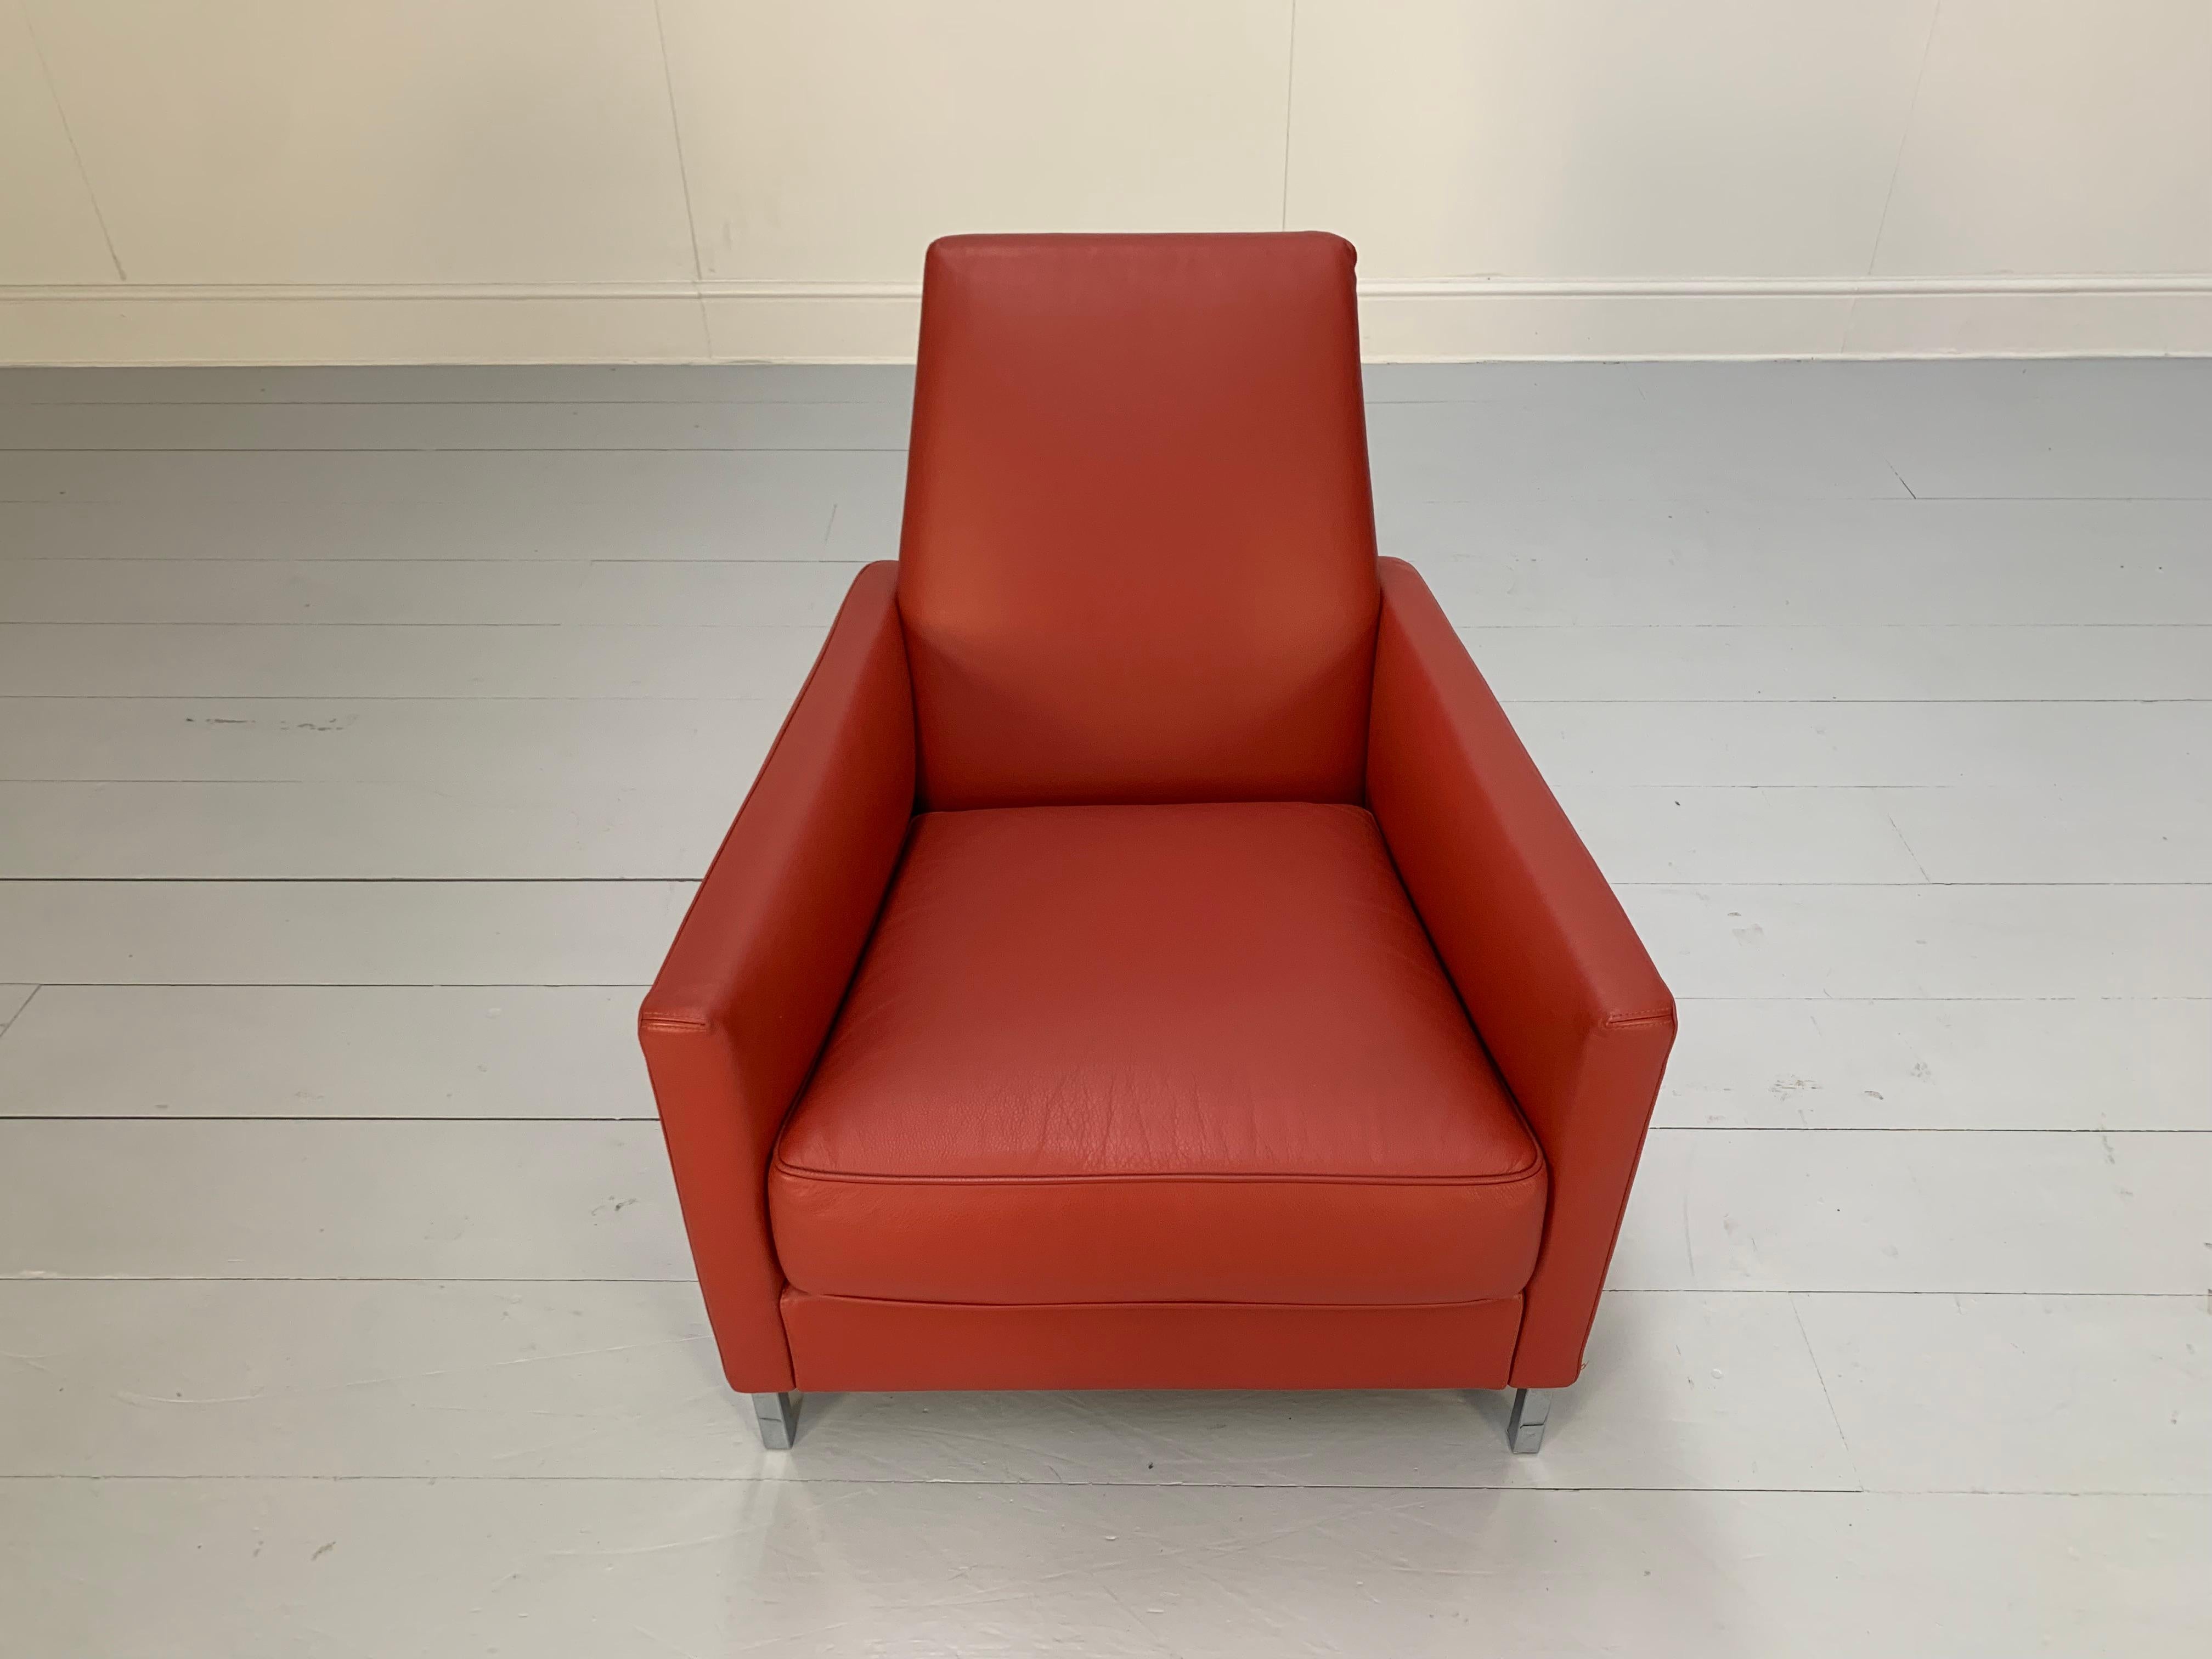 Moroso “Hyde Park” Sofa & 2 Armchair Suite, in Red “Pelle” Leather For Sale 10